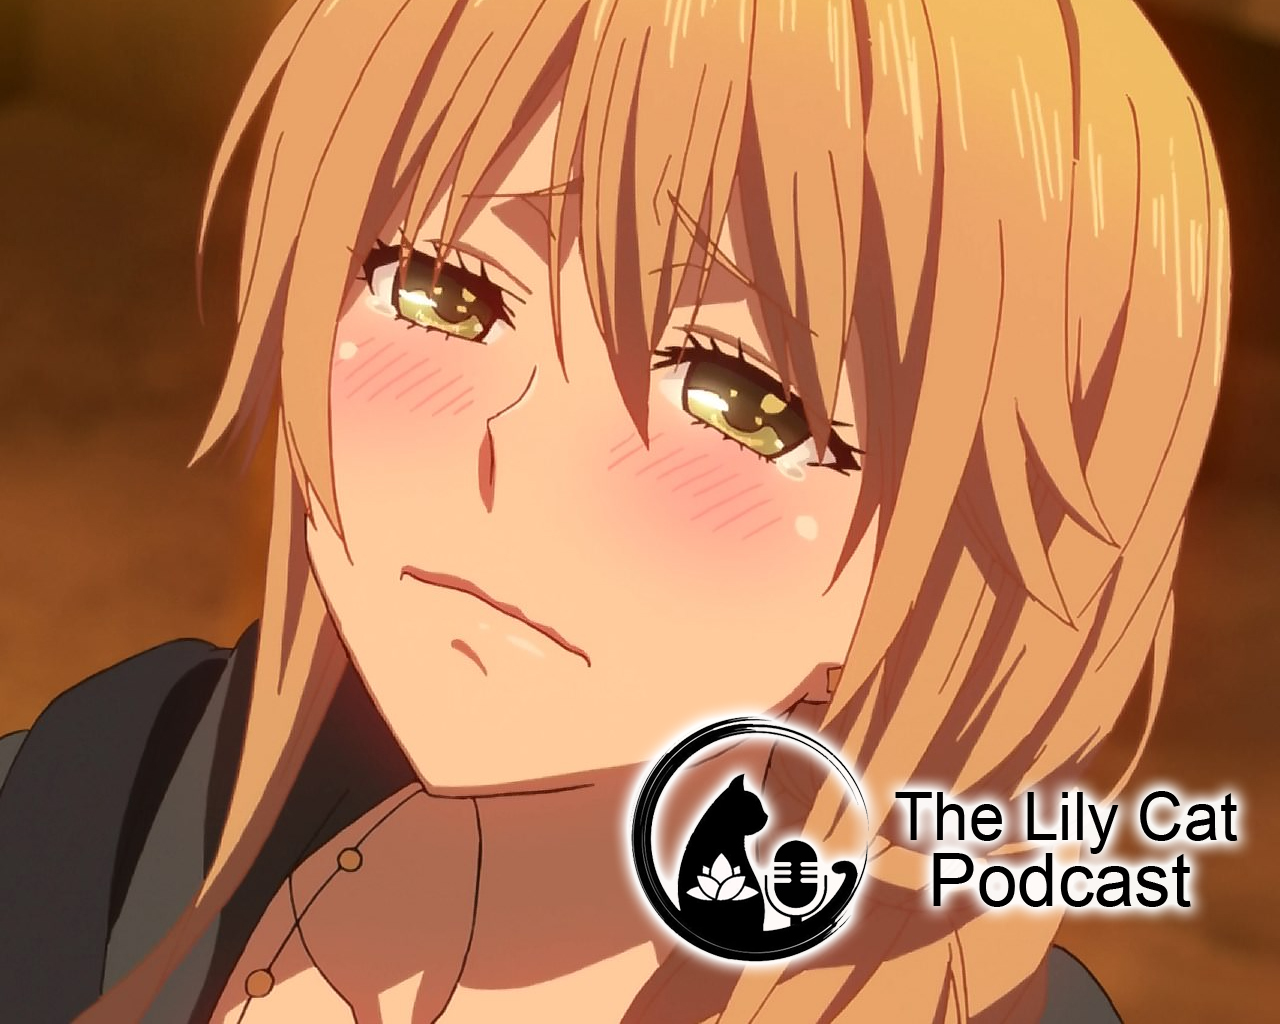 The Lily Cat Podcast Episode 3 – What happened?